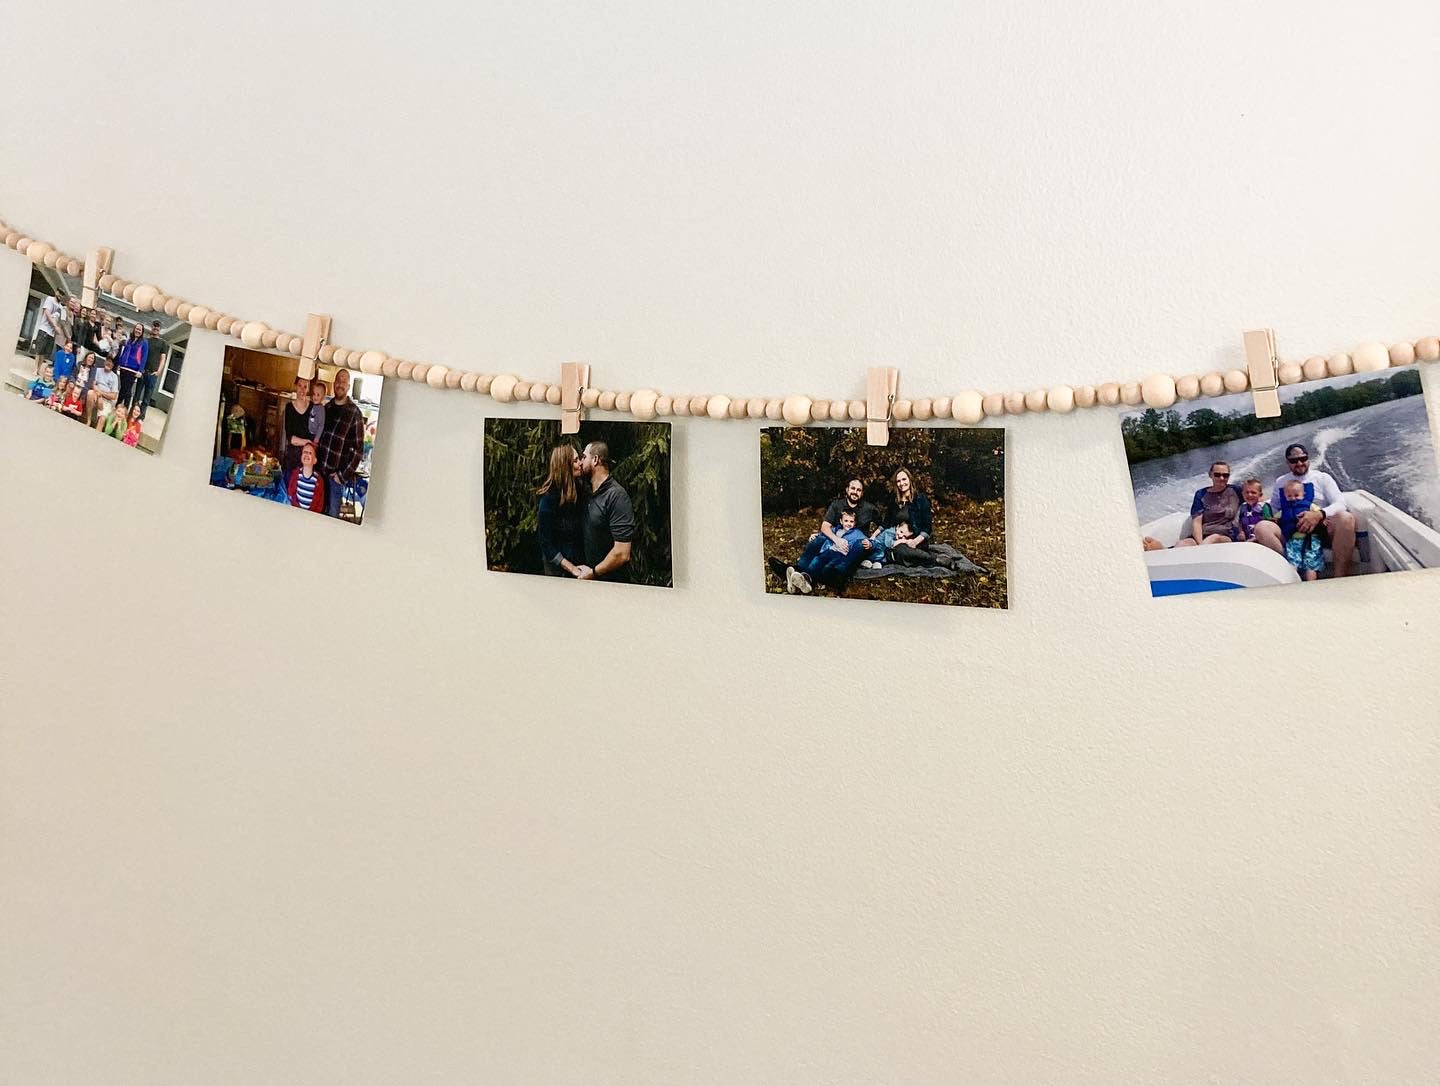 Handmade Wood bead garland display with jute twine tassels and 9 mini clothespins 6.5" total length hanging on wall displaying photographs